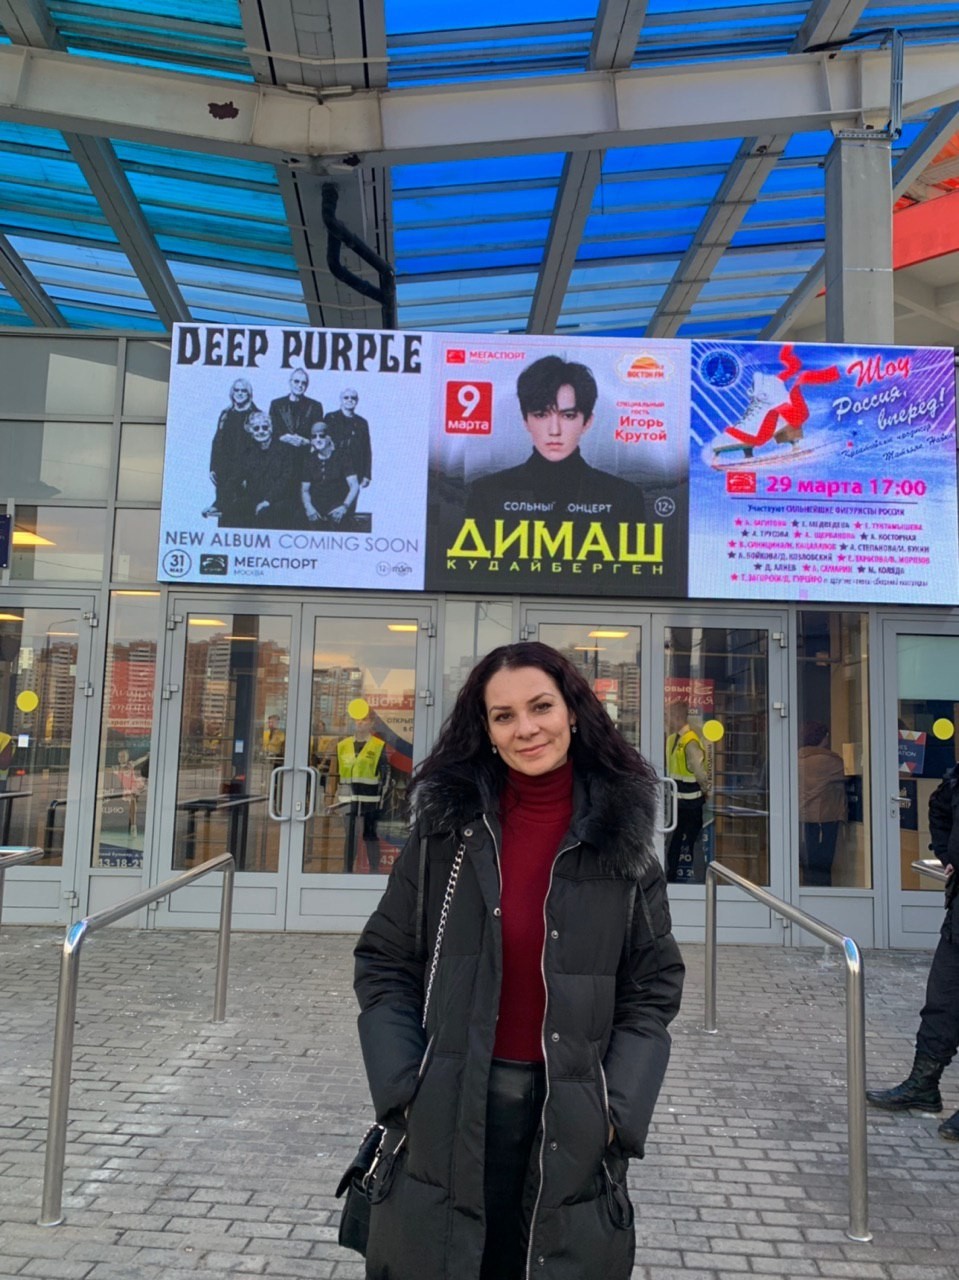 Only a few minutes left before Dimash’s concert in Moscow